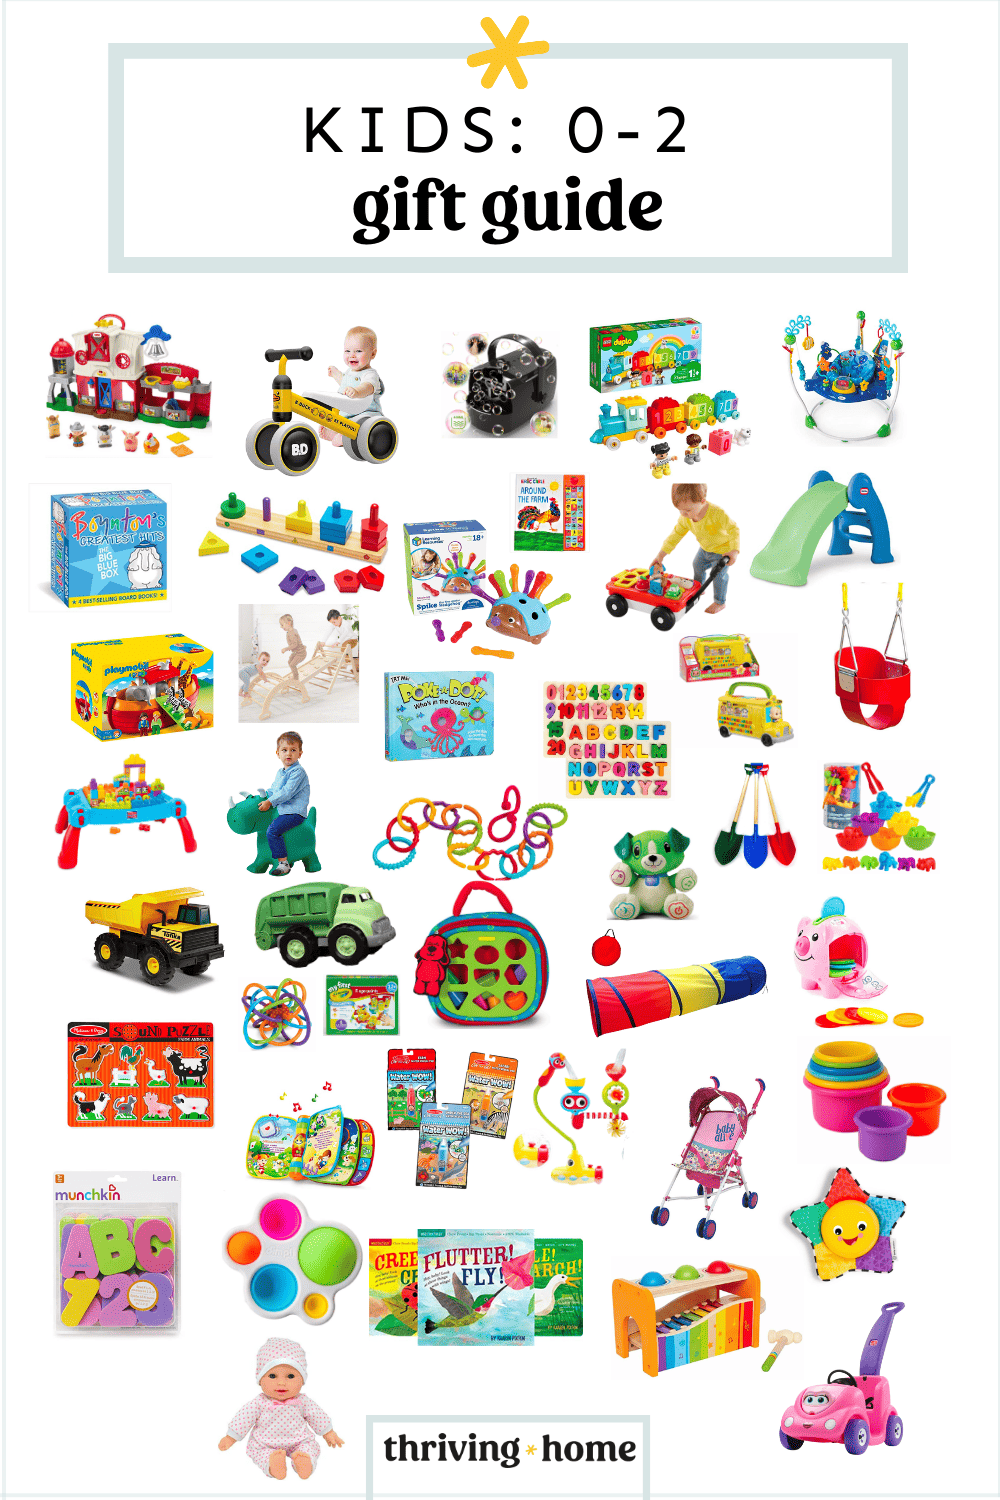 Gift guide for 0-2 year olds. 